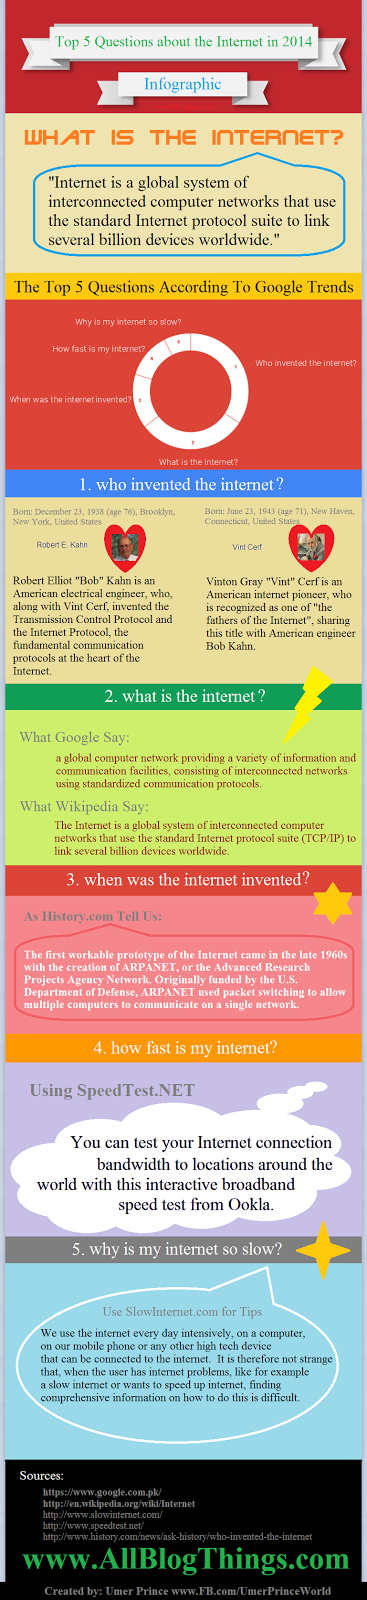 Top 5 Questions about the Internet in 2014 - #Infographic